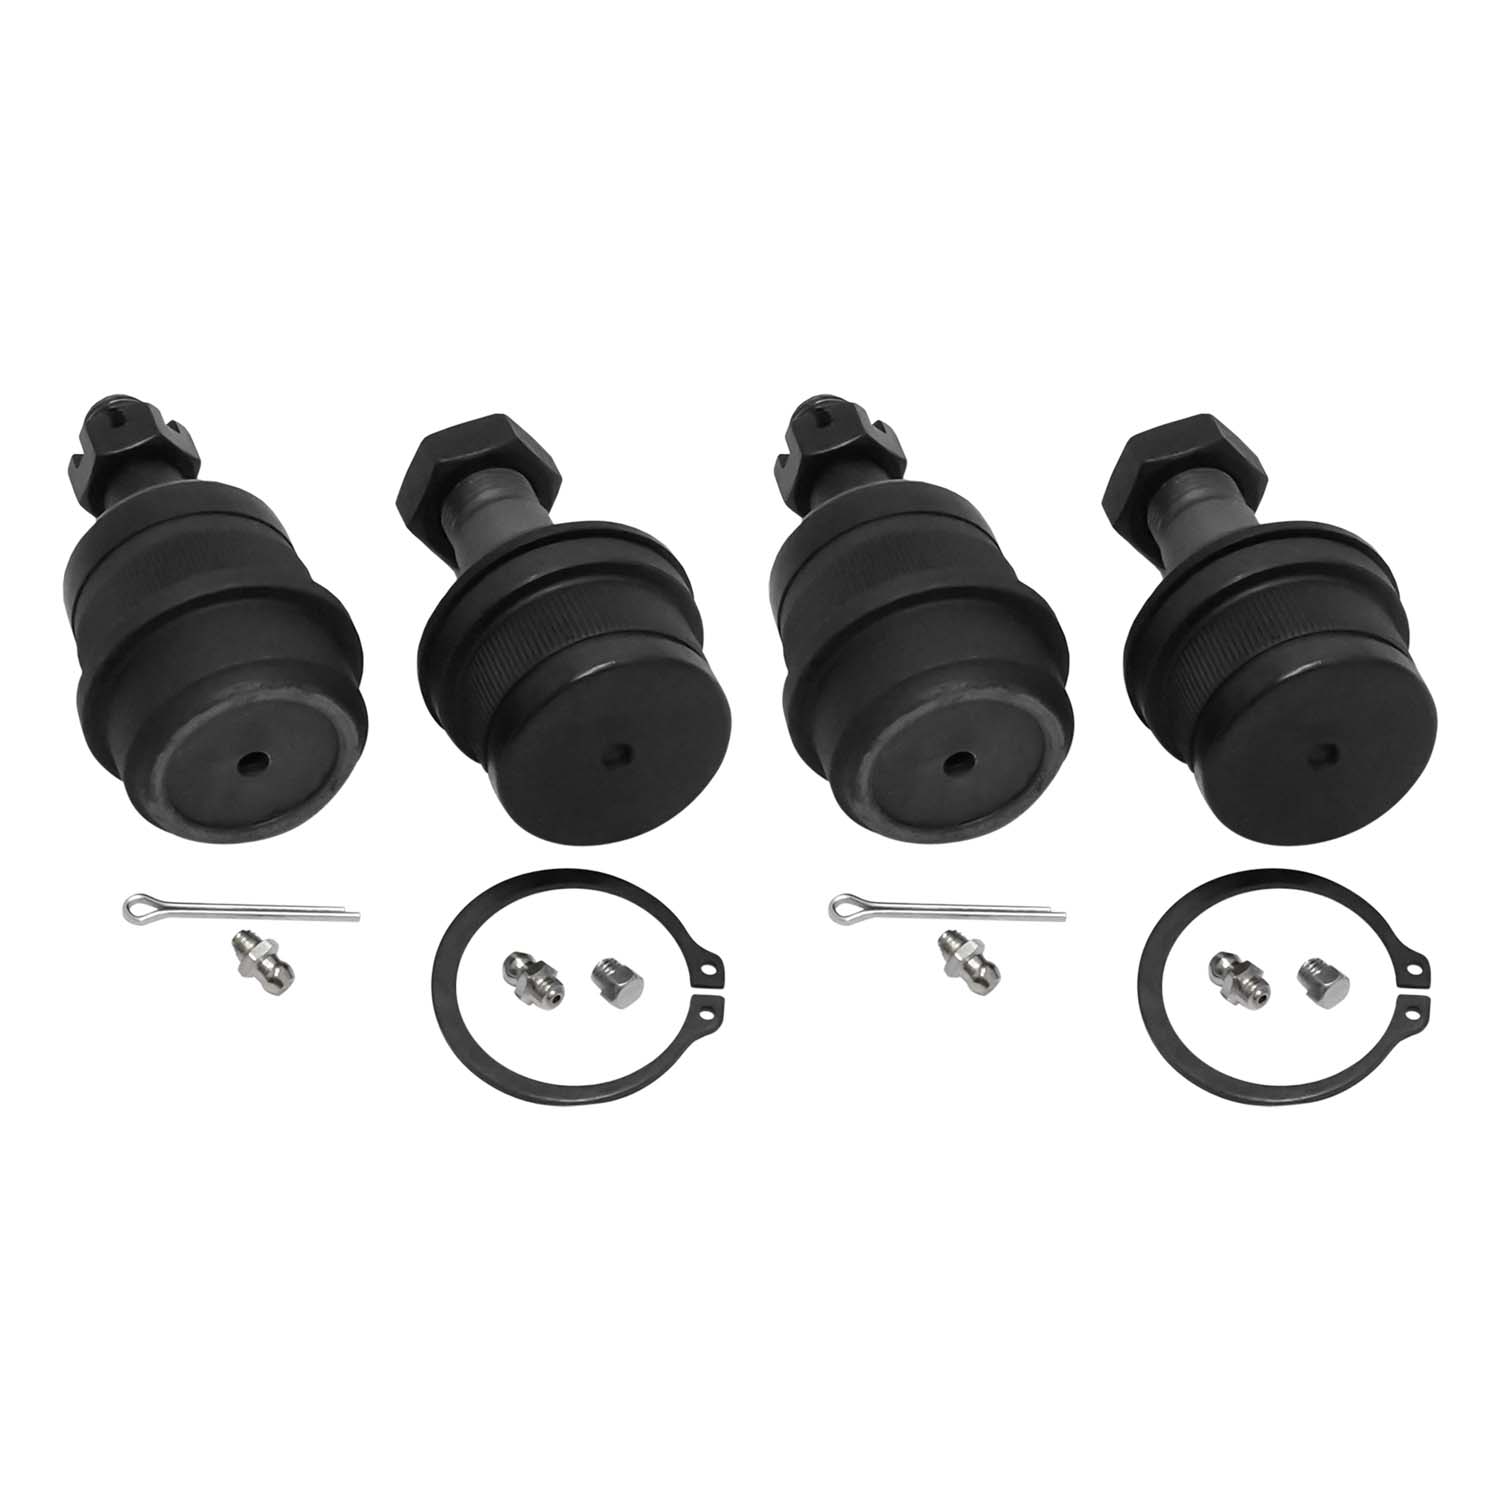 Ball Joint Kit For Dana 44 Front Differential, Both Sides